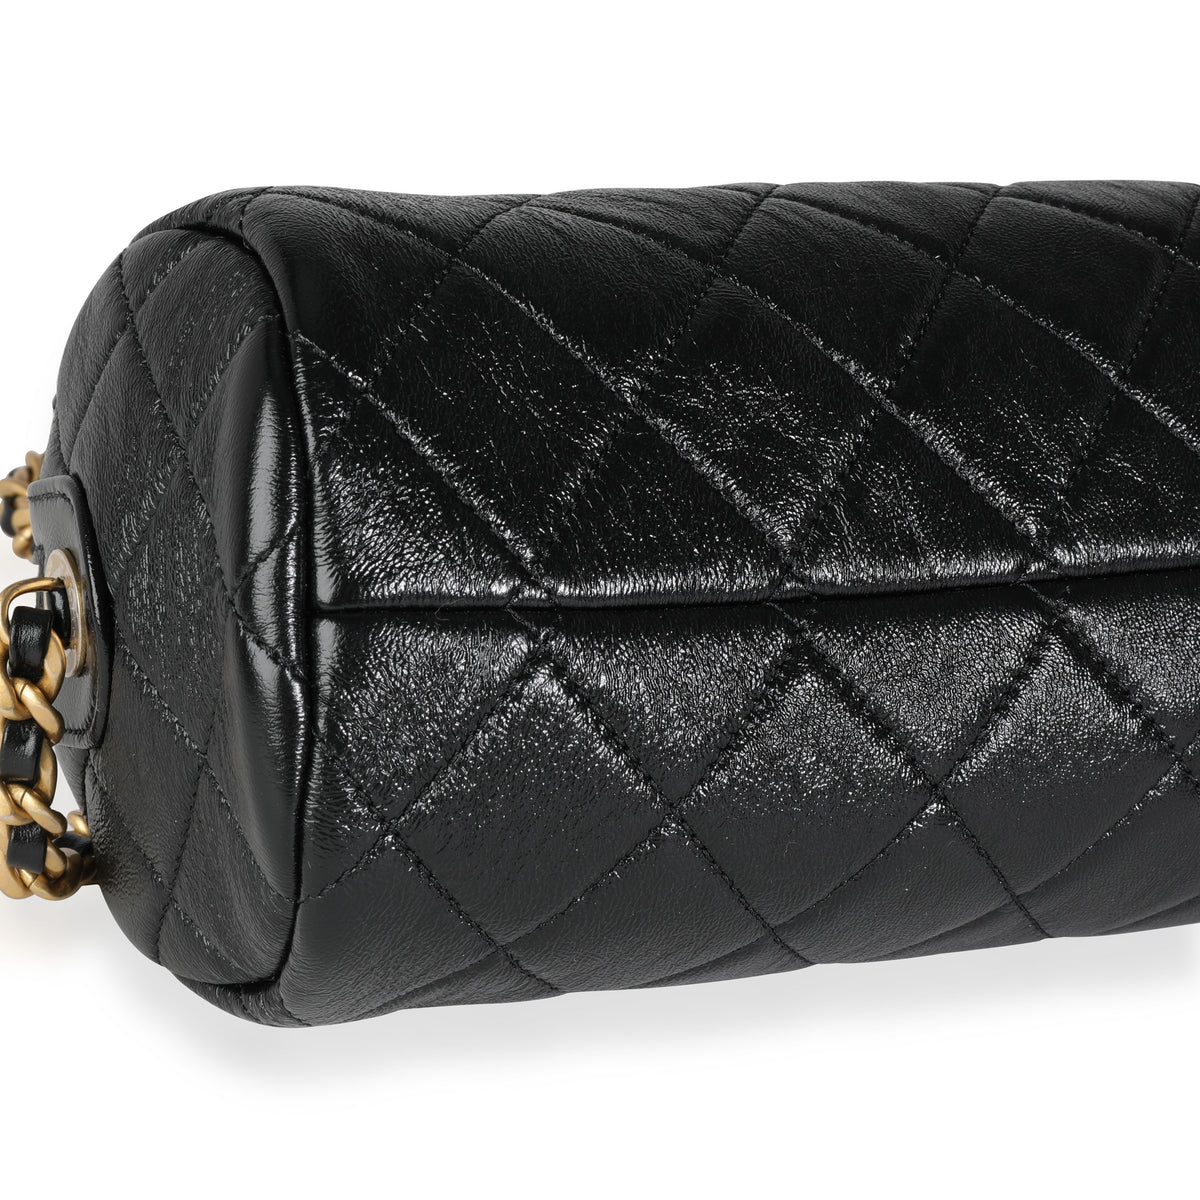 Chanel Black Quilted Shiny Lambskin Small Fashion Therapy Bowling Bag, myGemma